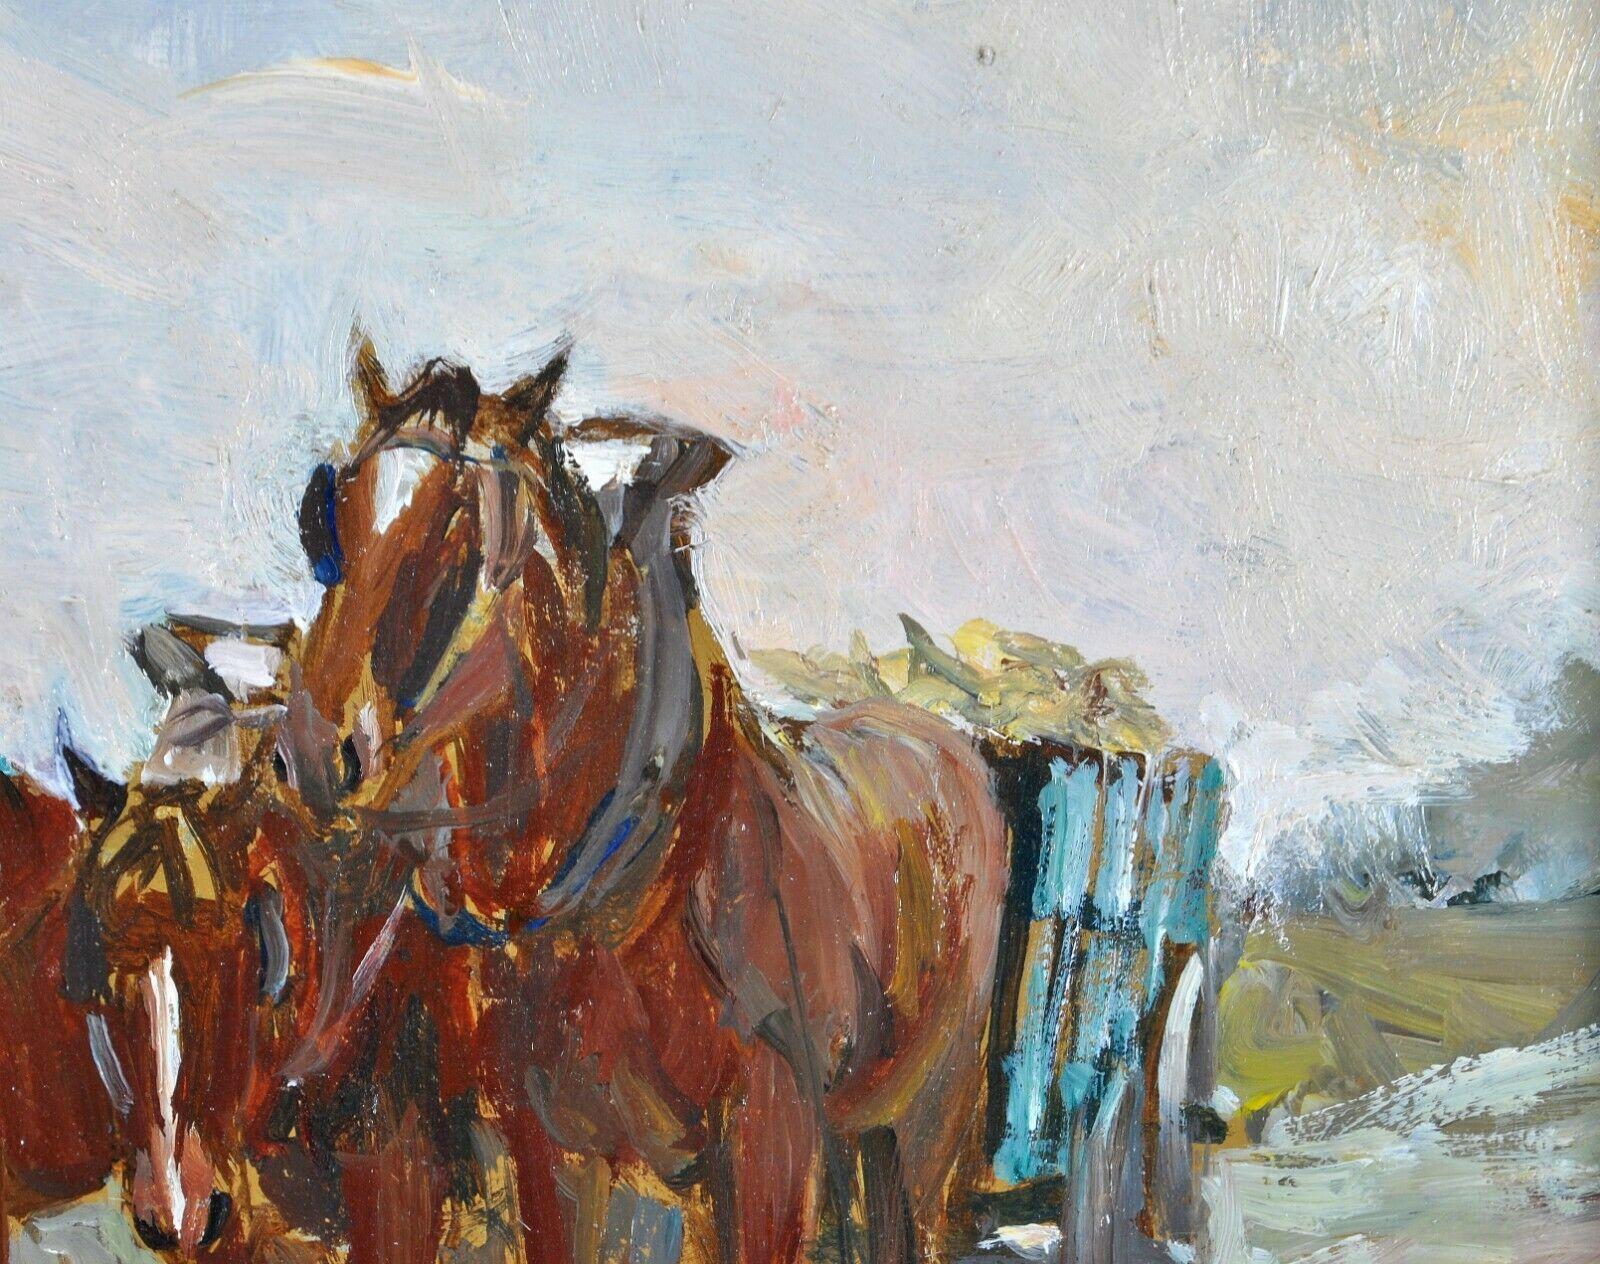 Horses Pulling Hay - Belgian Post-Impressionist Oil on Board Painting - Beige Landscape Painting by Cecile Mersch